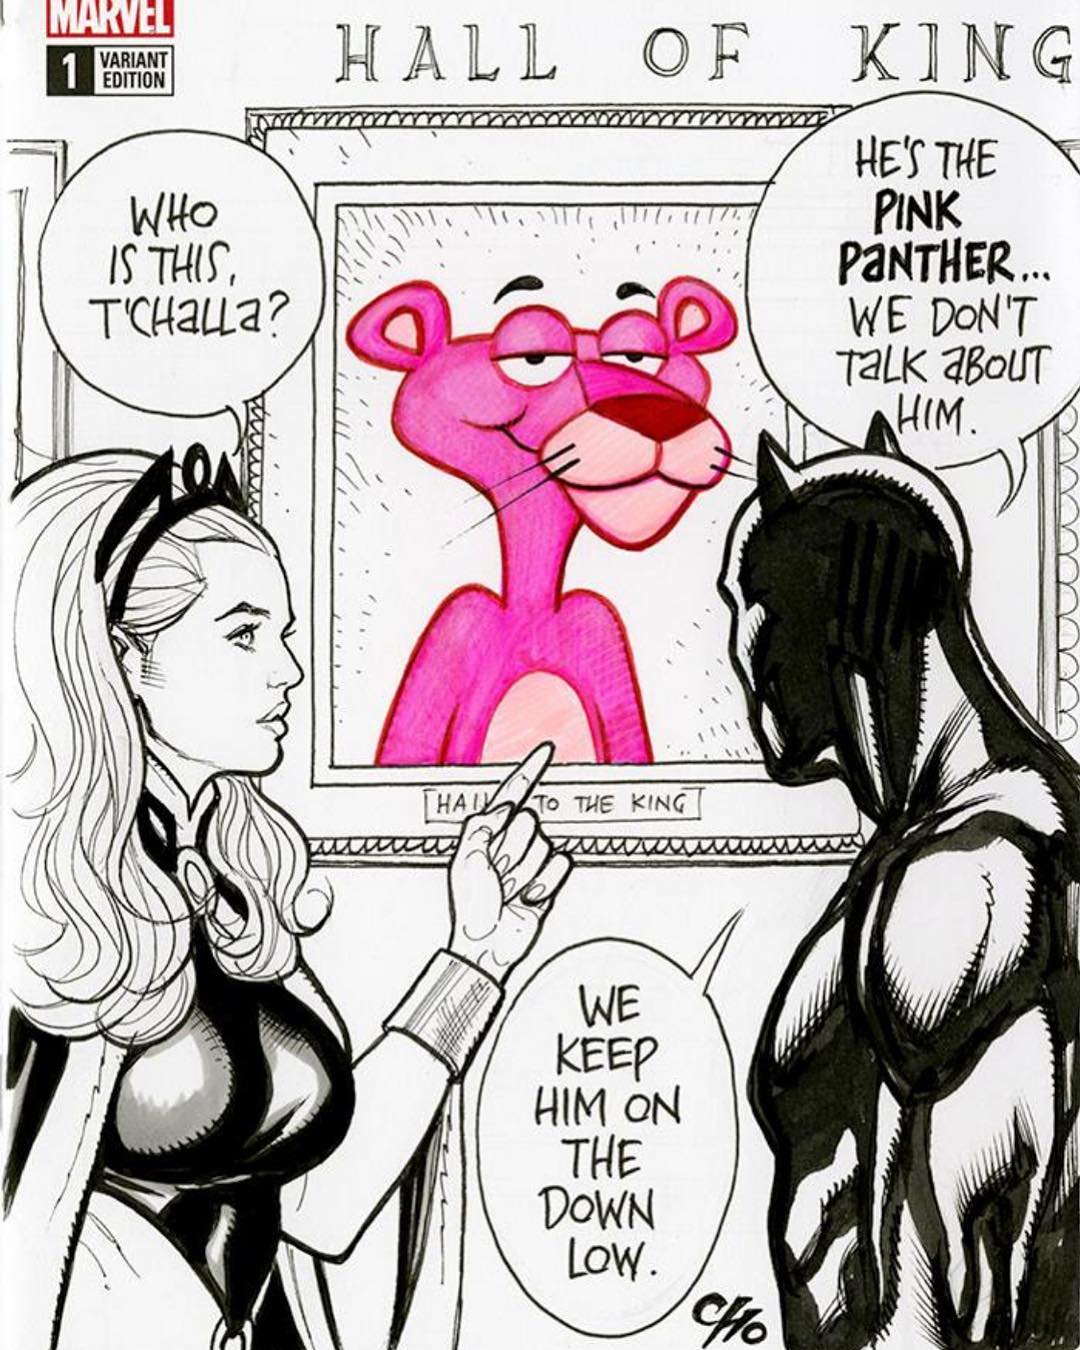 marvel pink panther - Marvel Hall Of King Variant Edition Who Is This, T'Challa? He'S The Pink Panther... We Don'T Talk About Ahim. Hairto The King We Keep Him On The Down Low.